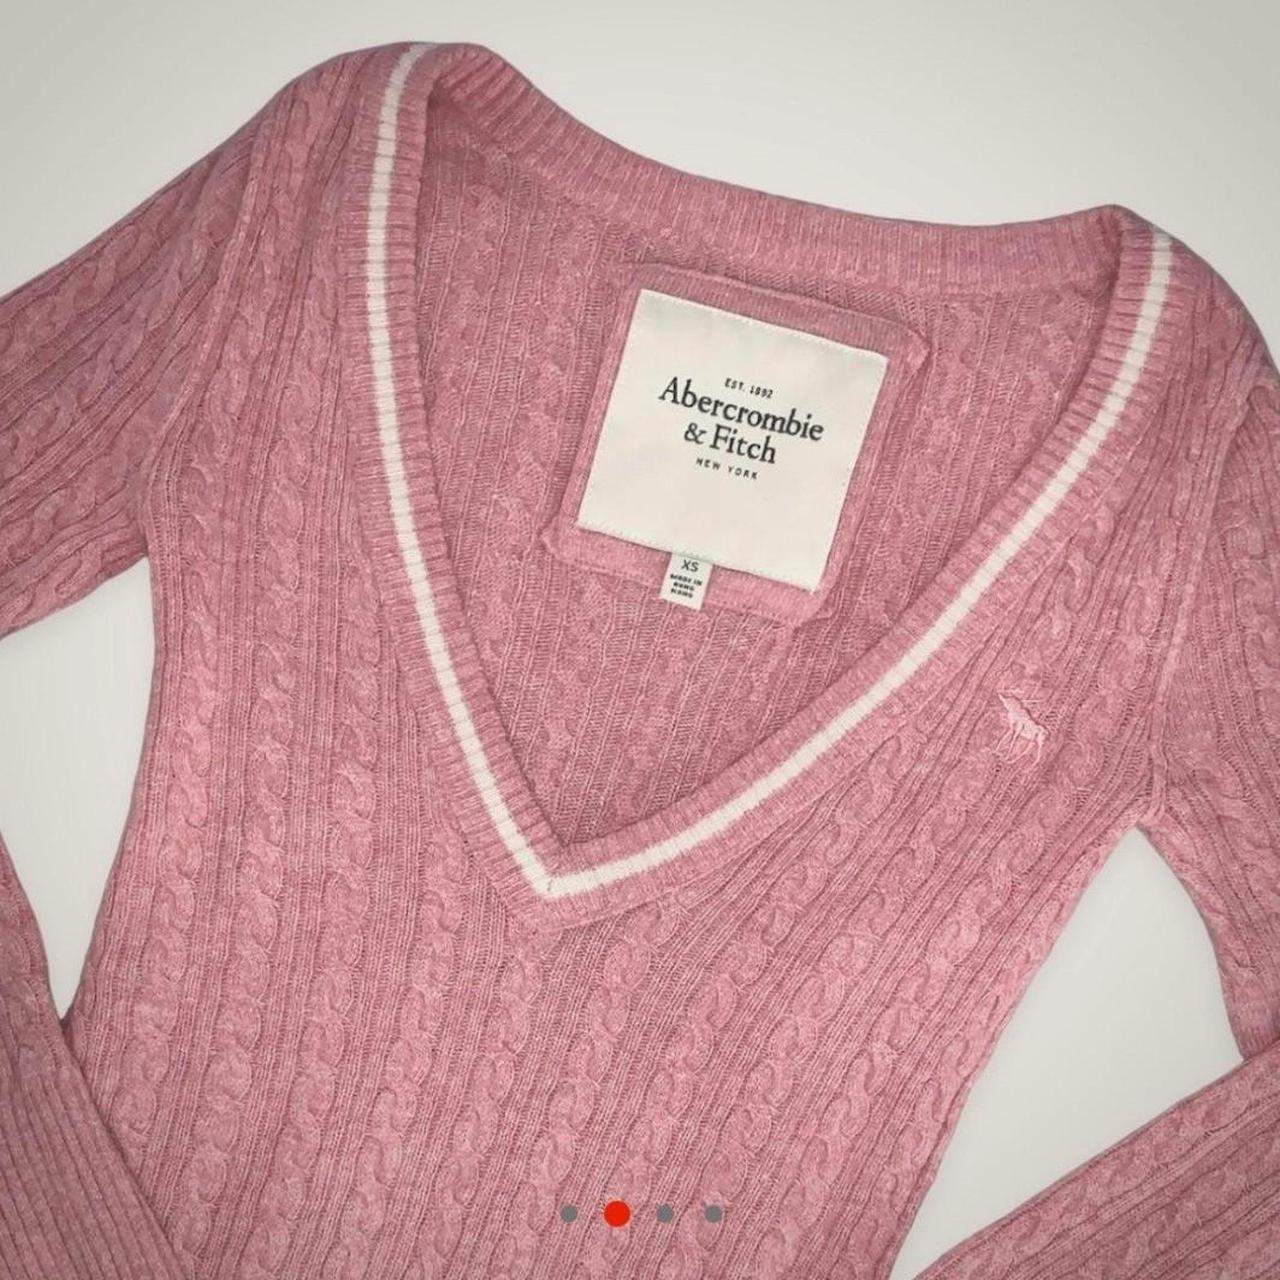 Abercrombie & Fitch Women's White and Pink Jumper | Depop